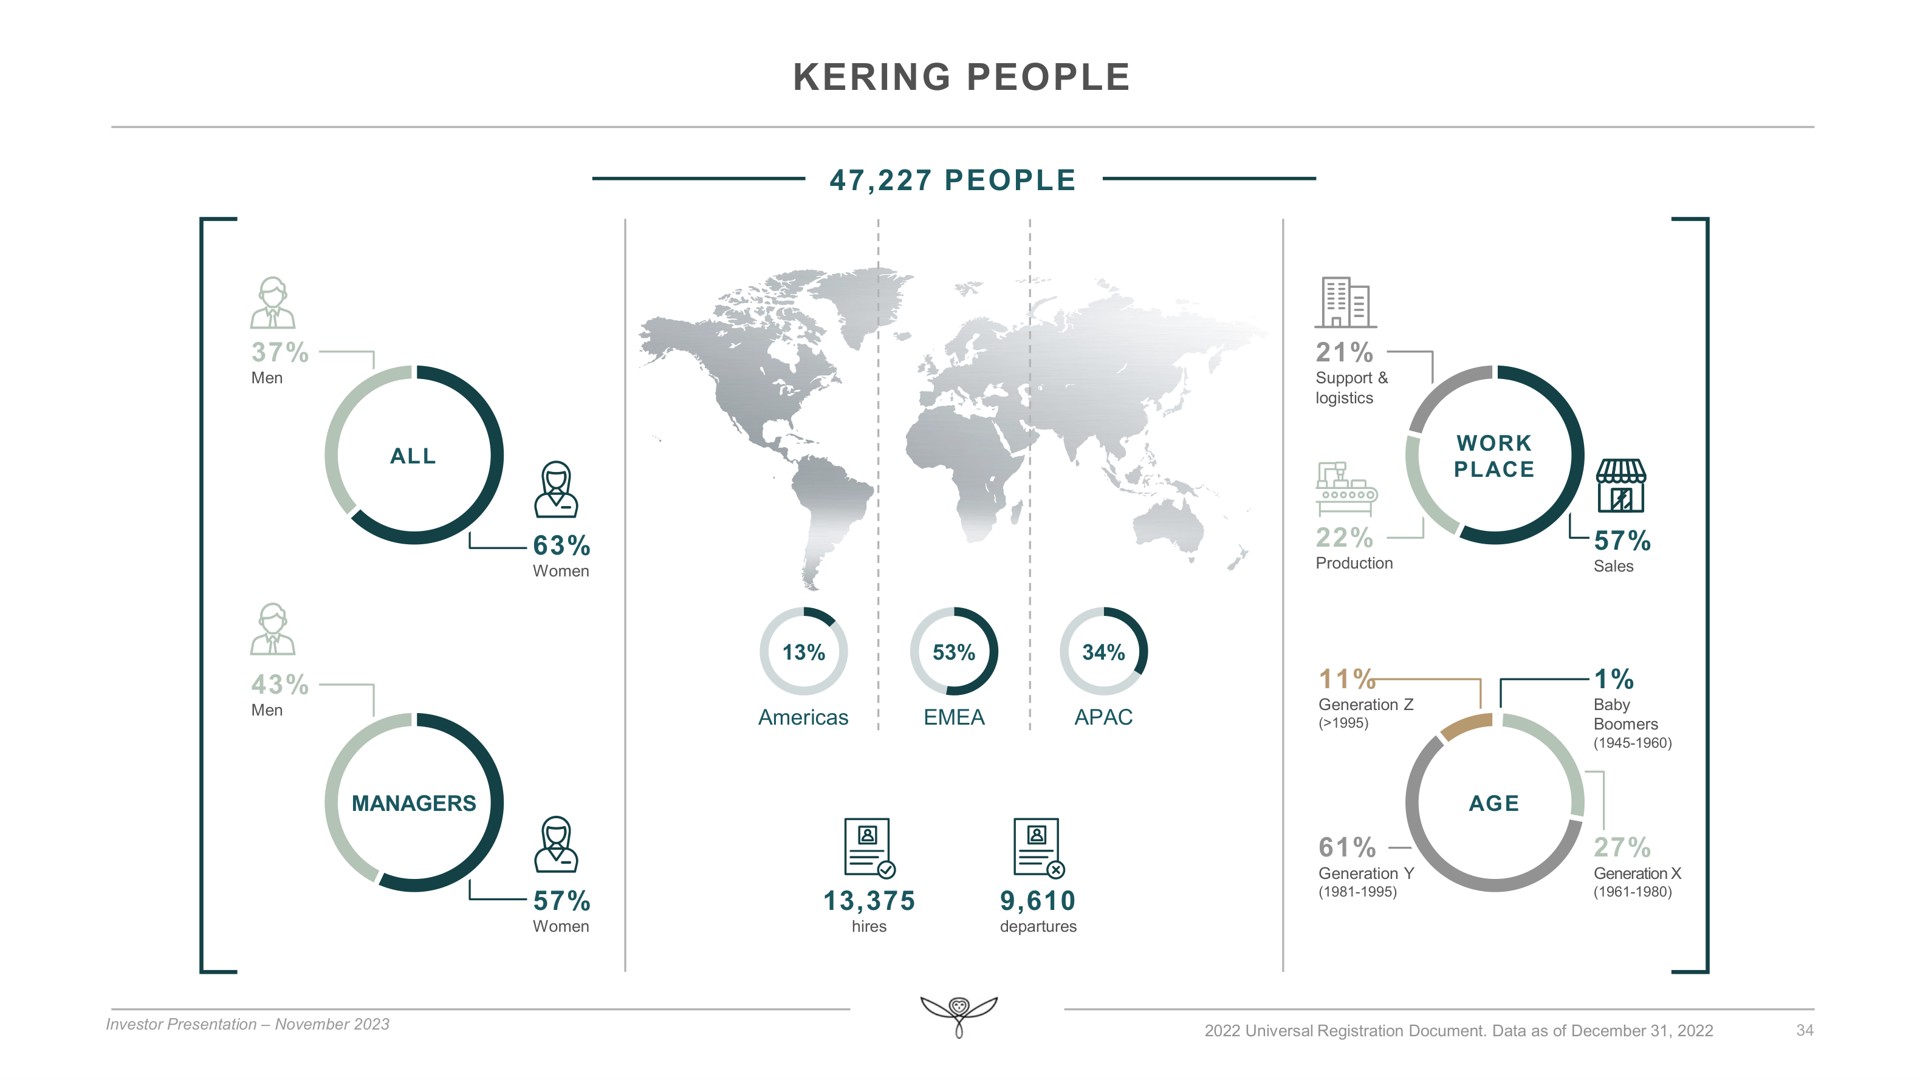 people people place no | Kering